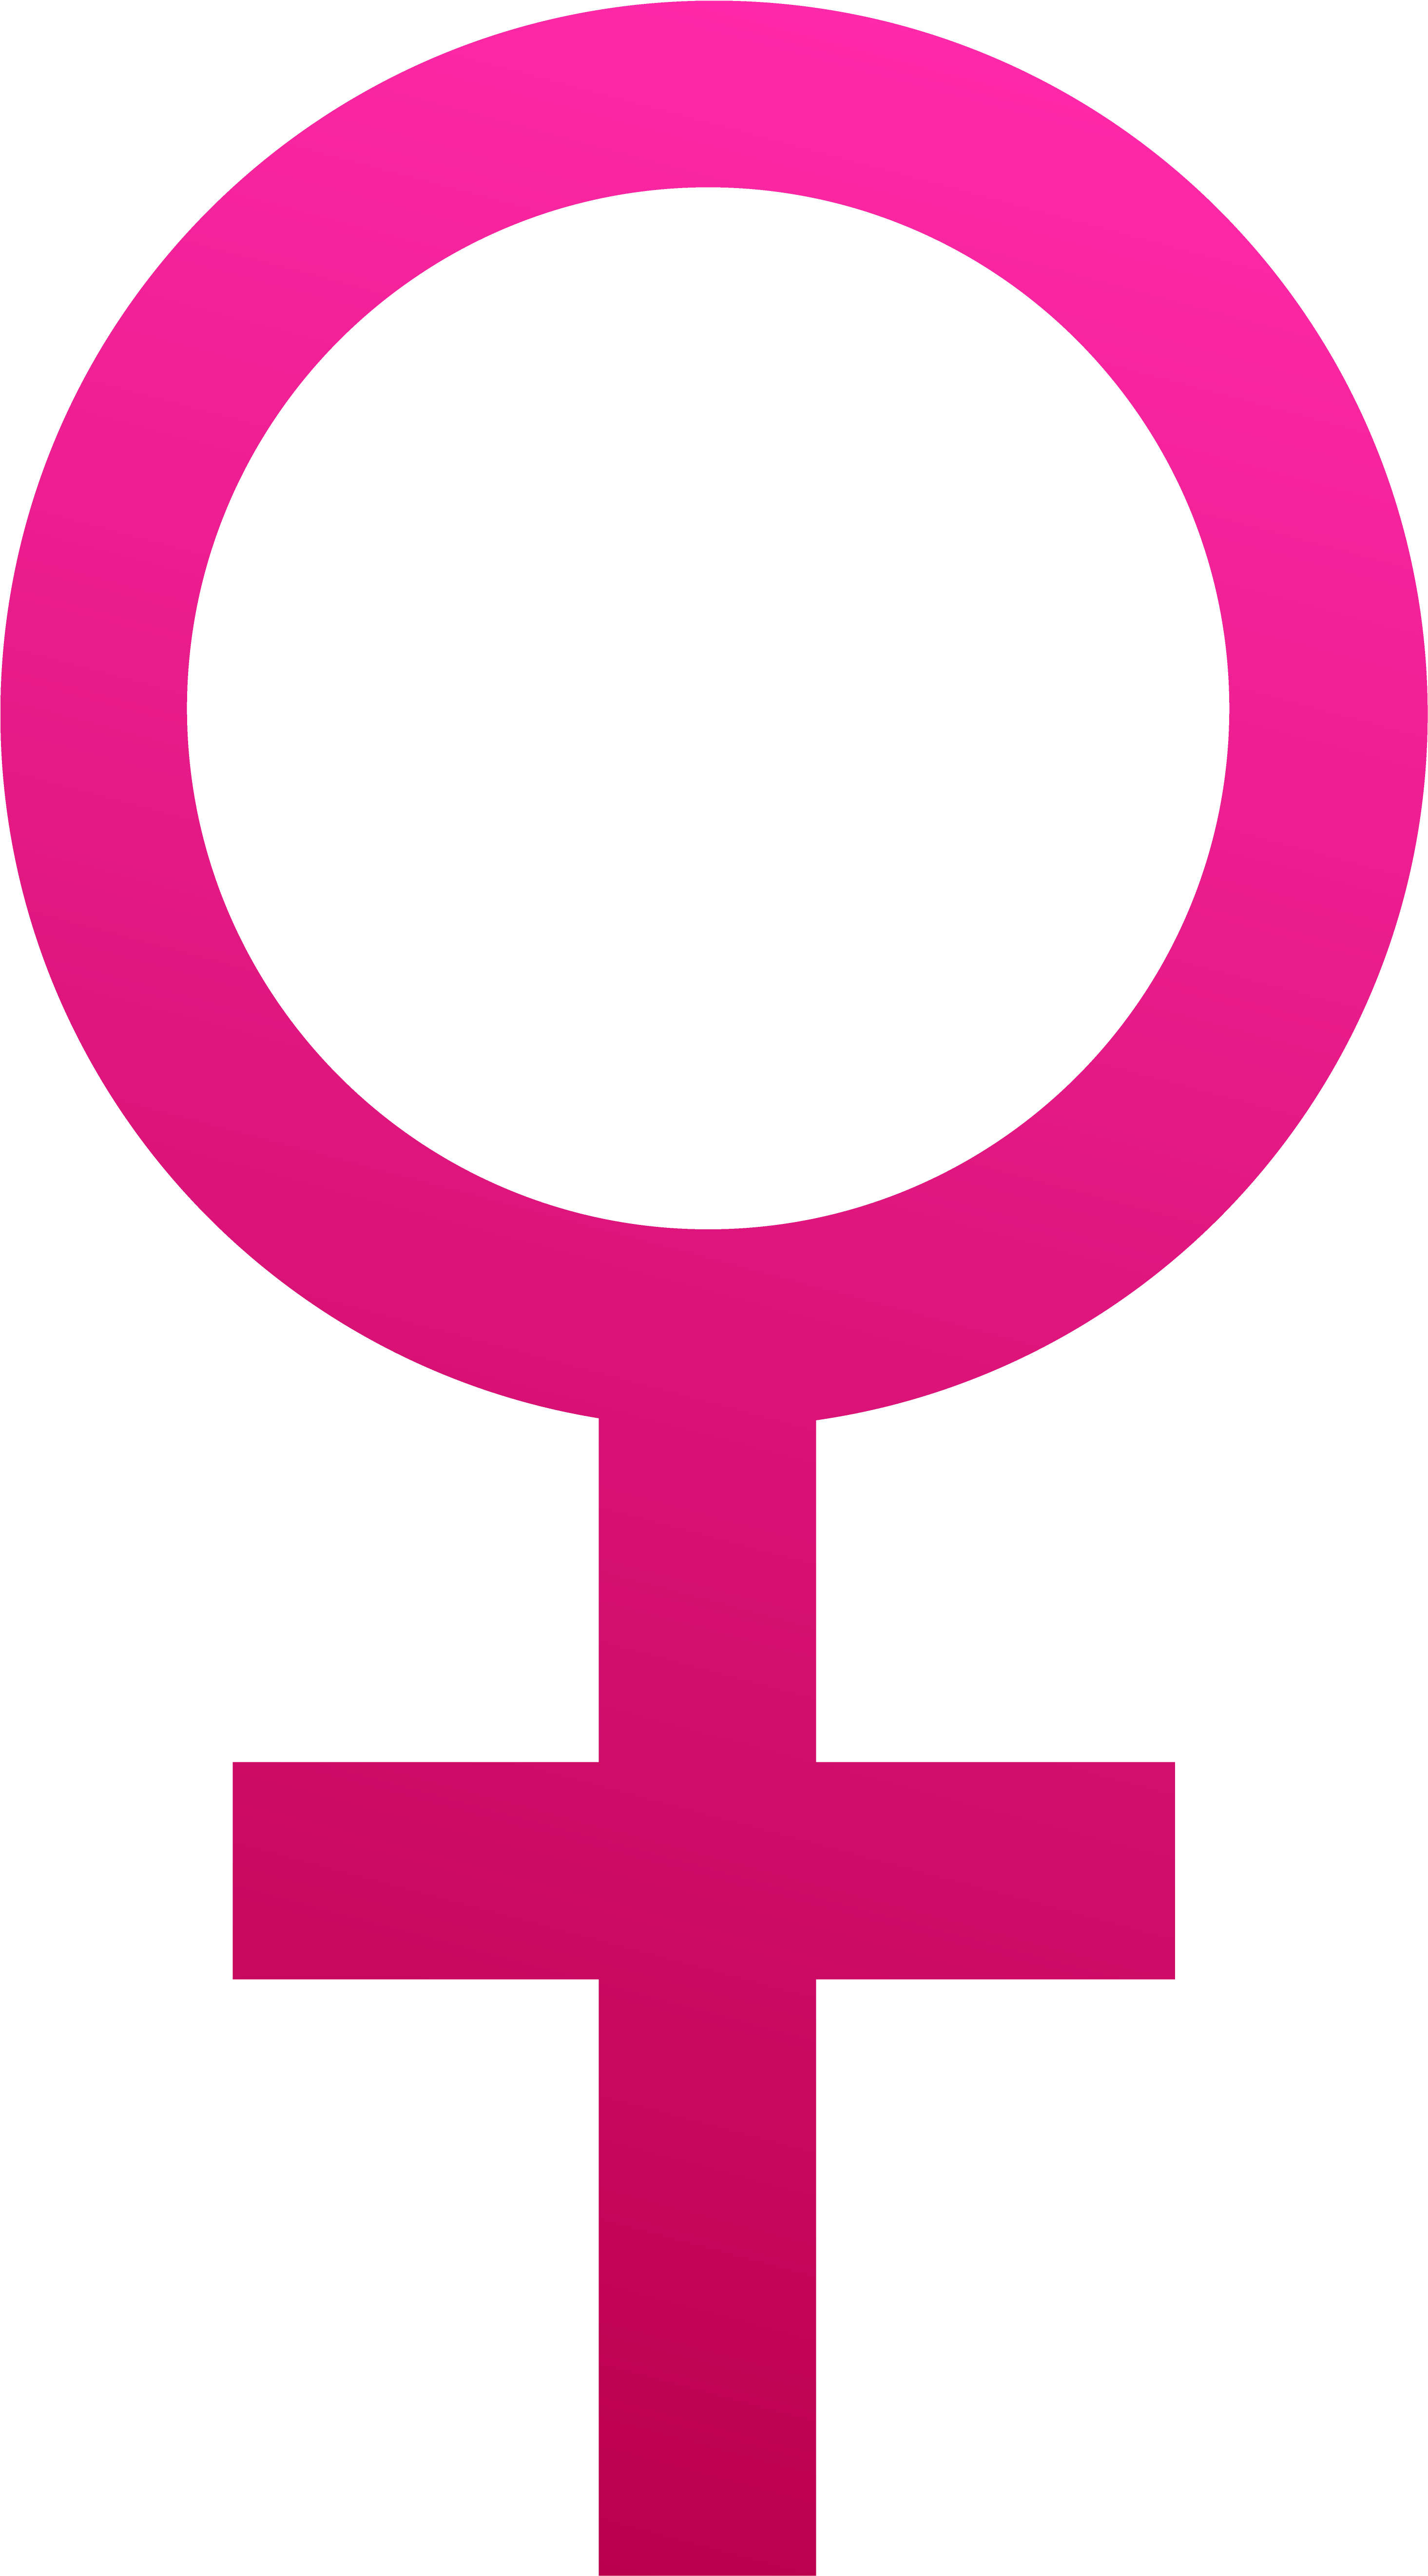 Female Symbol 2 Clip Art At Clker Woman Symbol - More Women Or Men In The World (3230x5625)